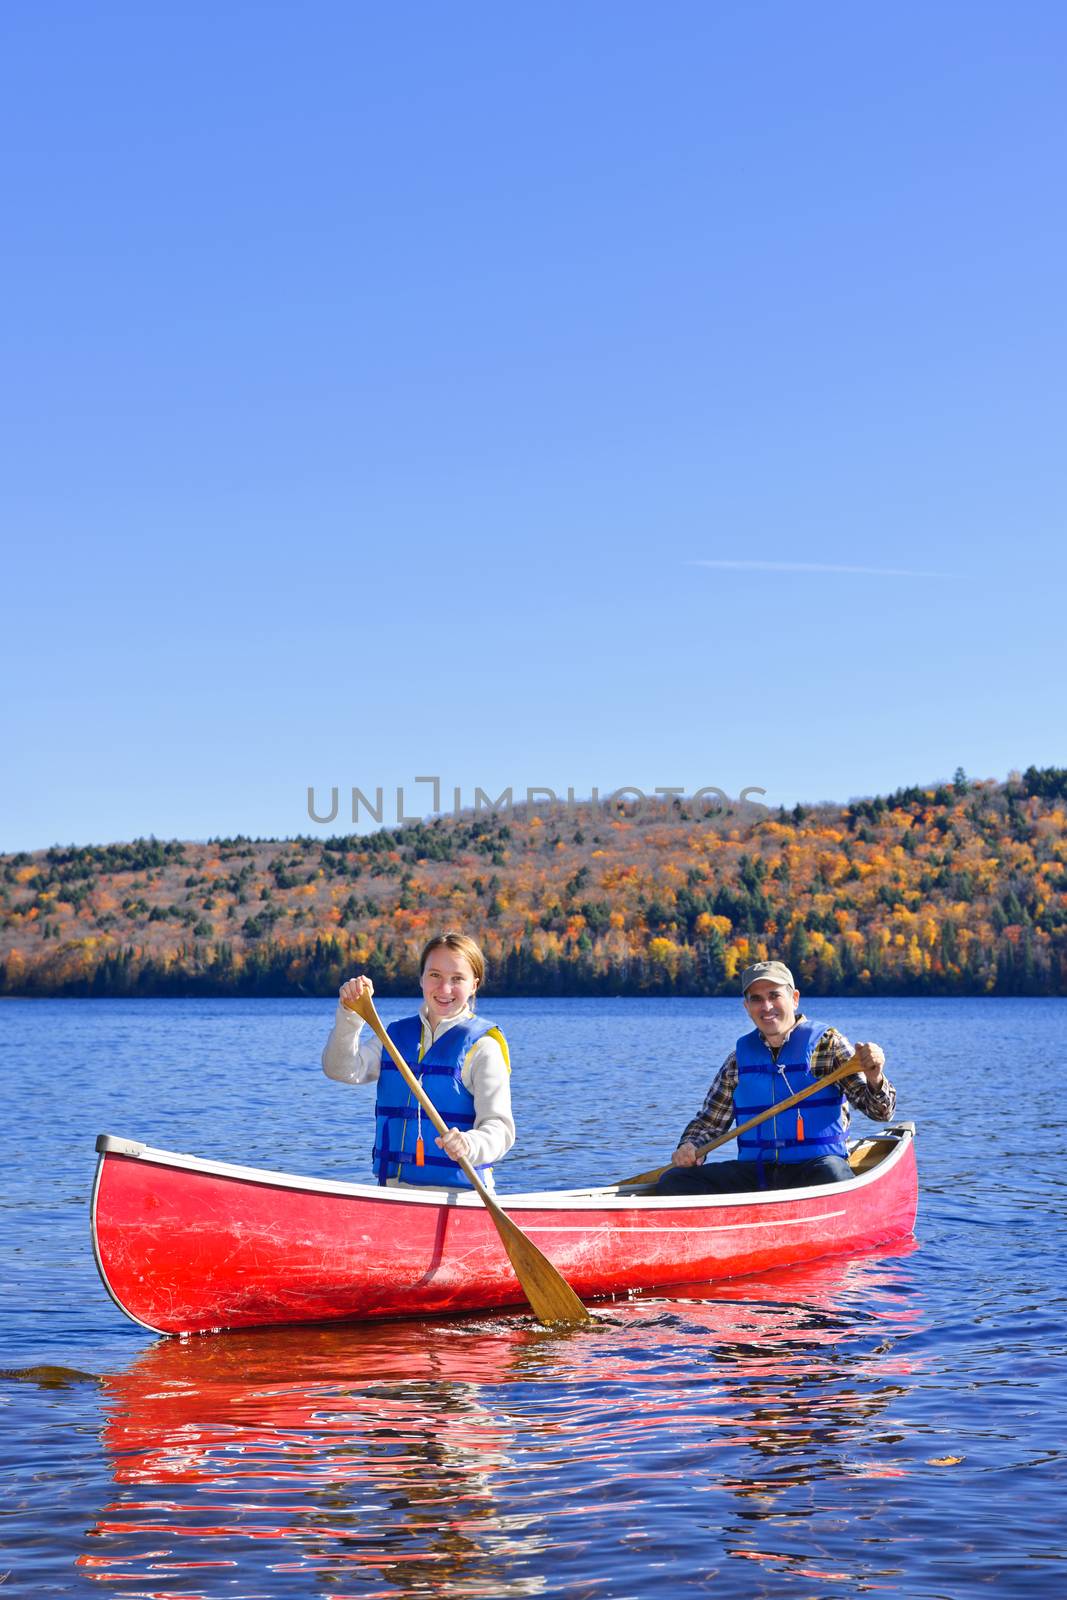 Family canoeing on Lake of Two Rivers, Ontario, Canada